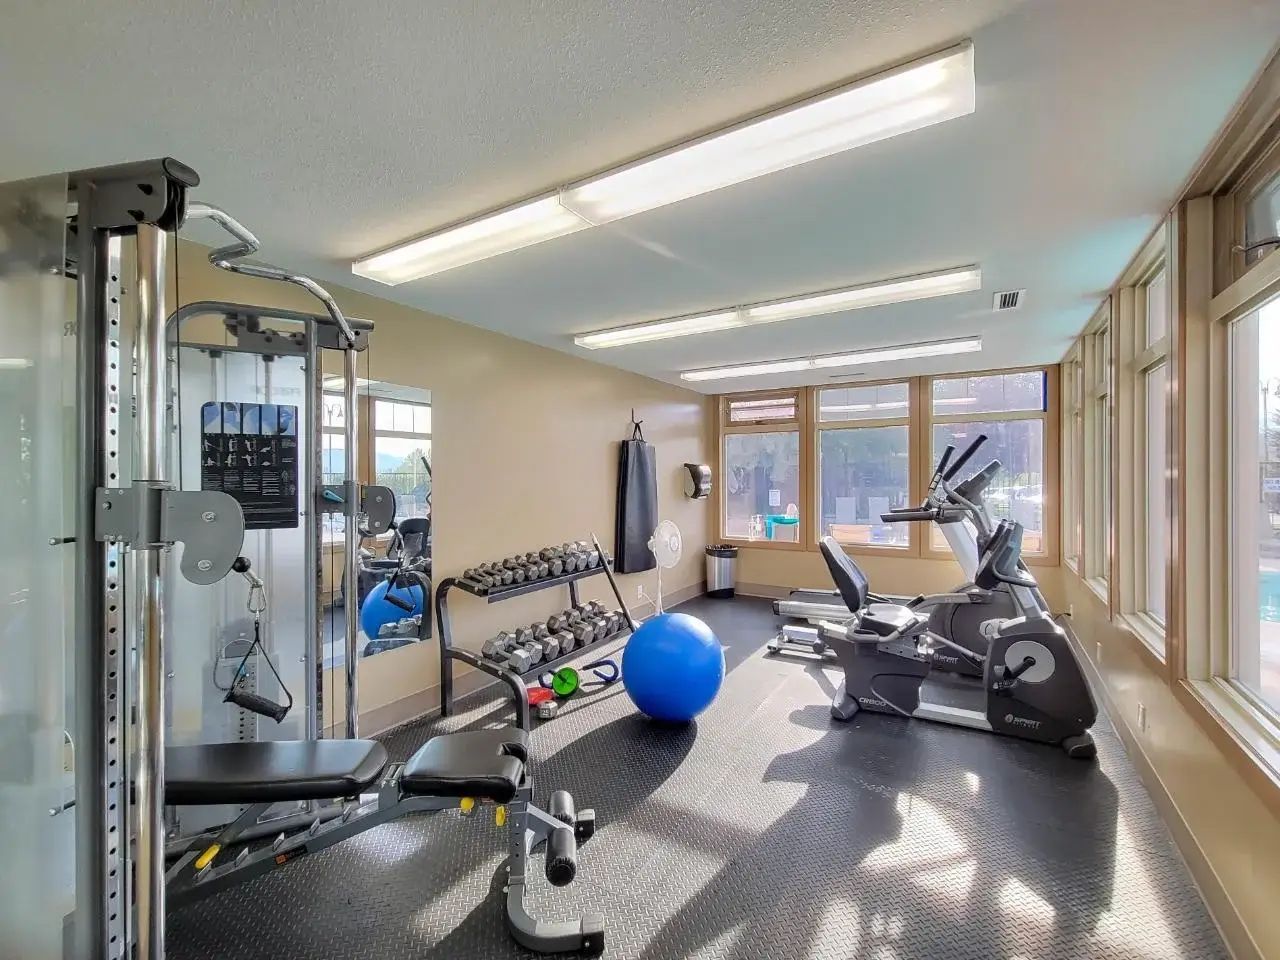 Full gym fitness centre of the Stylish condo of Lake Windermere Pointe in Invermere, a BC Vacation Rental hosted by Aisling Baile Property Management.